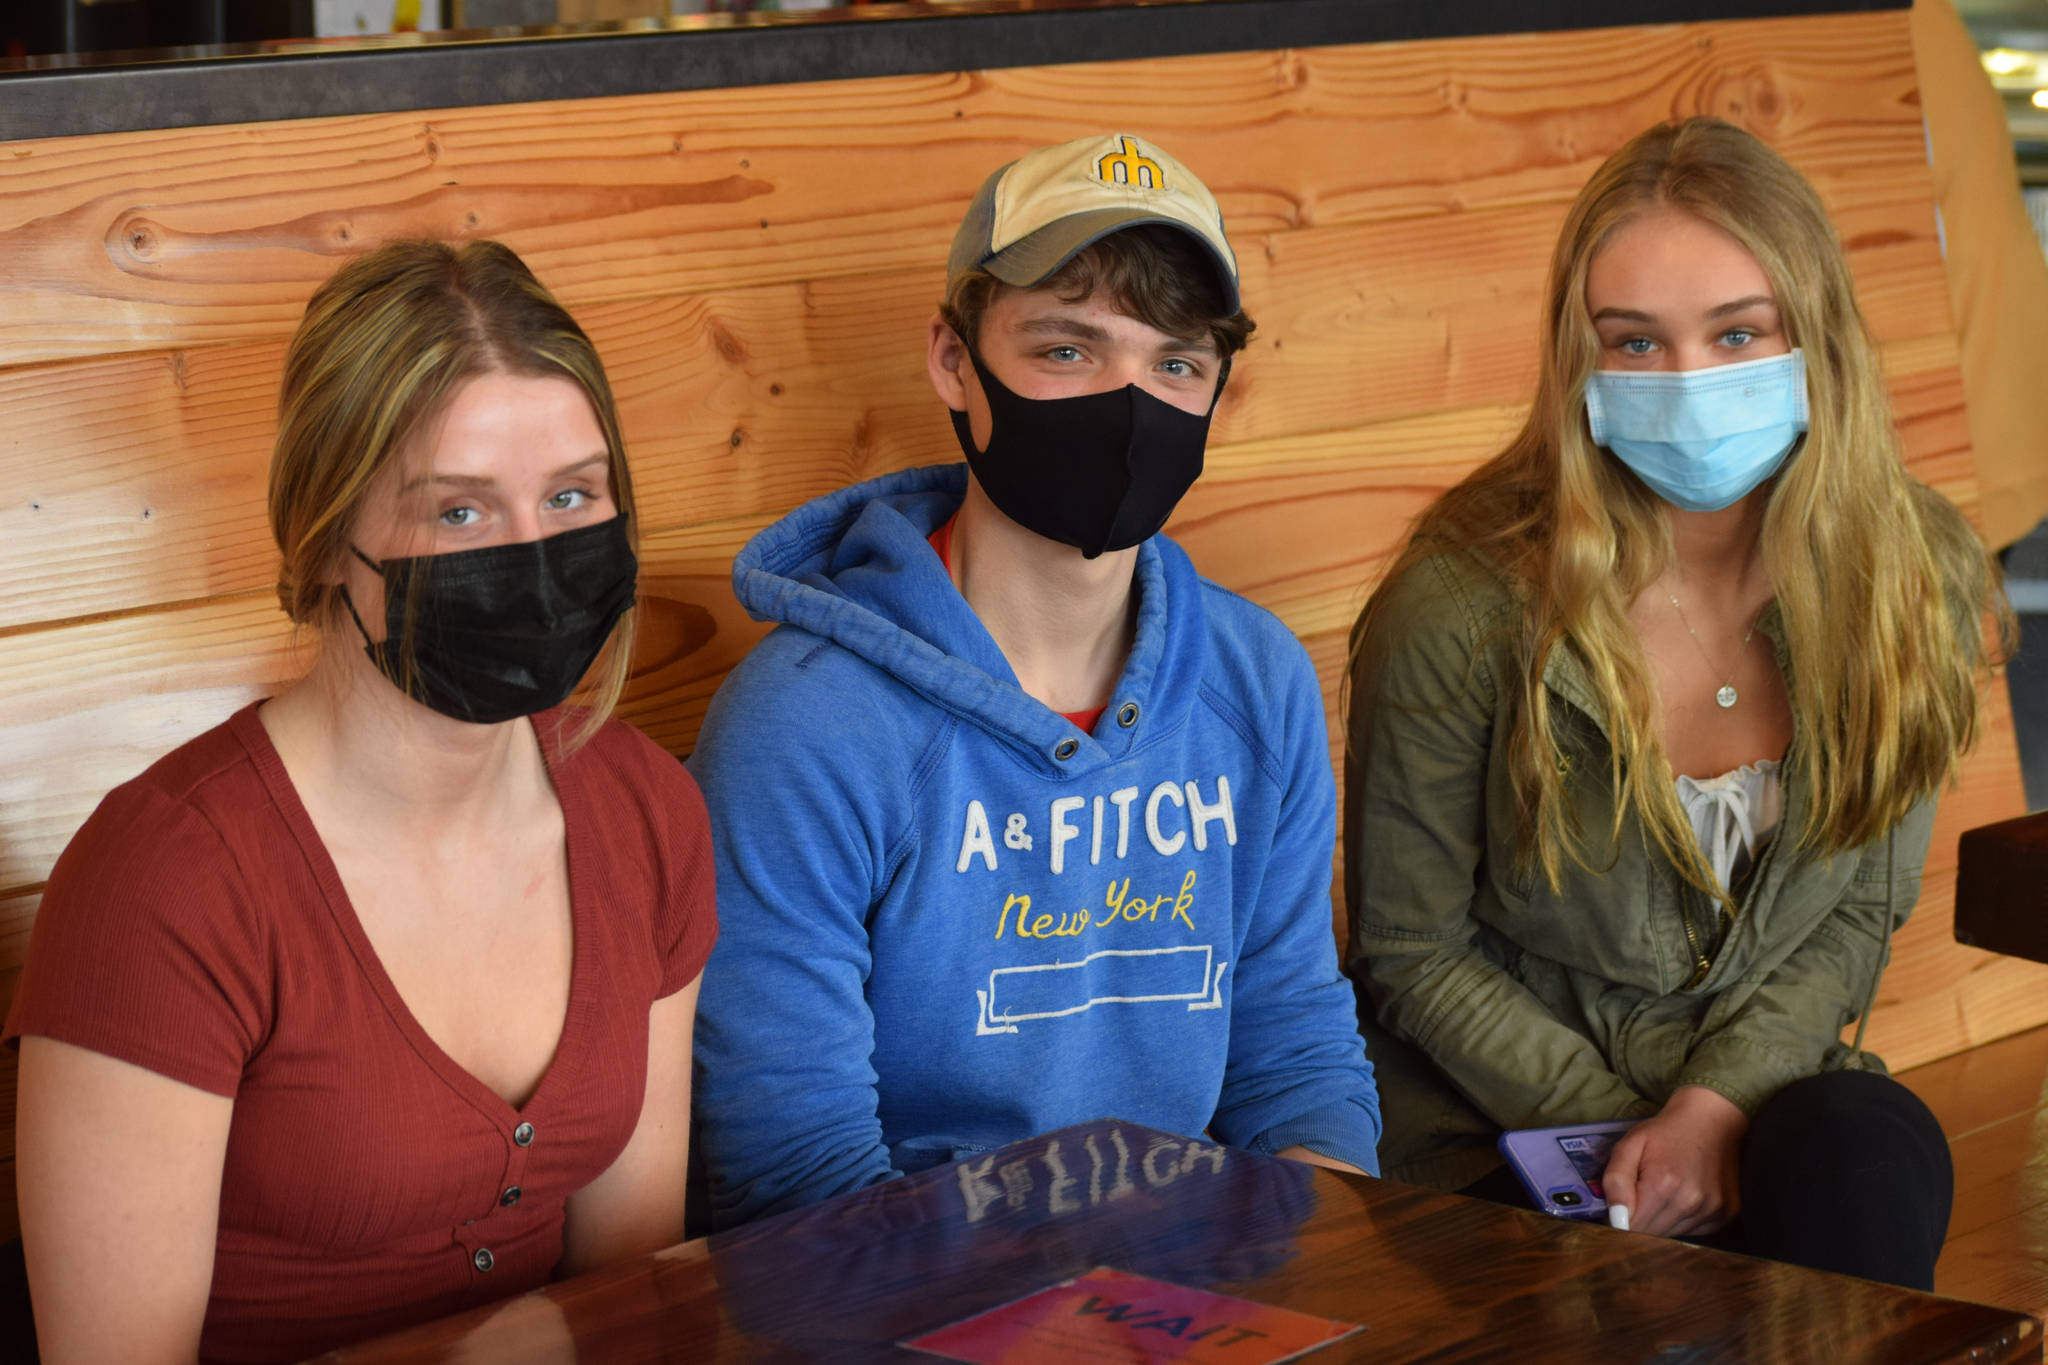 From left to right: Rhys Cannava, 16, Quinn Cox, 17, and Jolie Widaman, 16, are pictured here in Soldtna, Alaska on Thursday, April 15, 2021. The three Soldotna High School juniors got vaccinated against COVID-19 in March 2021.